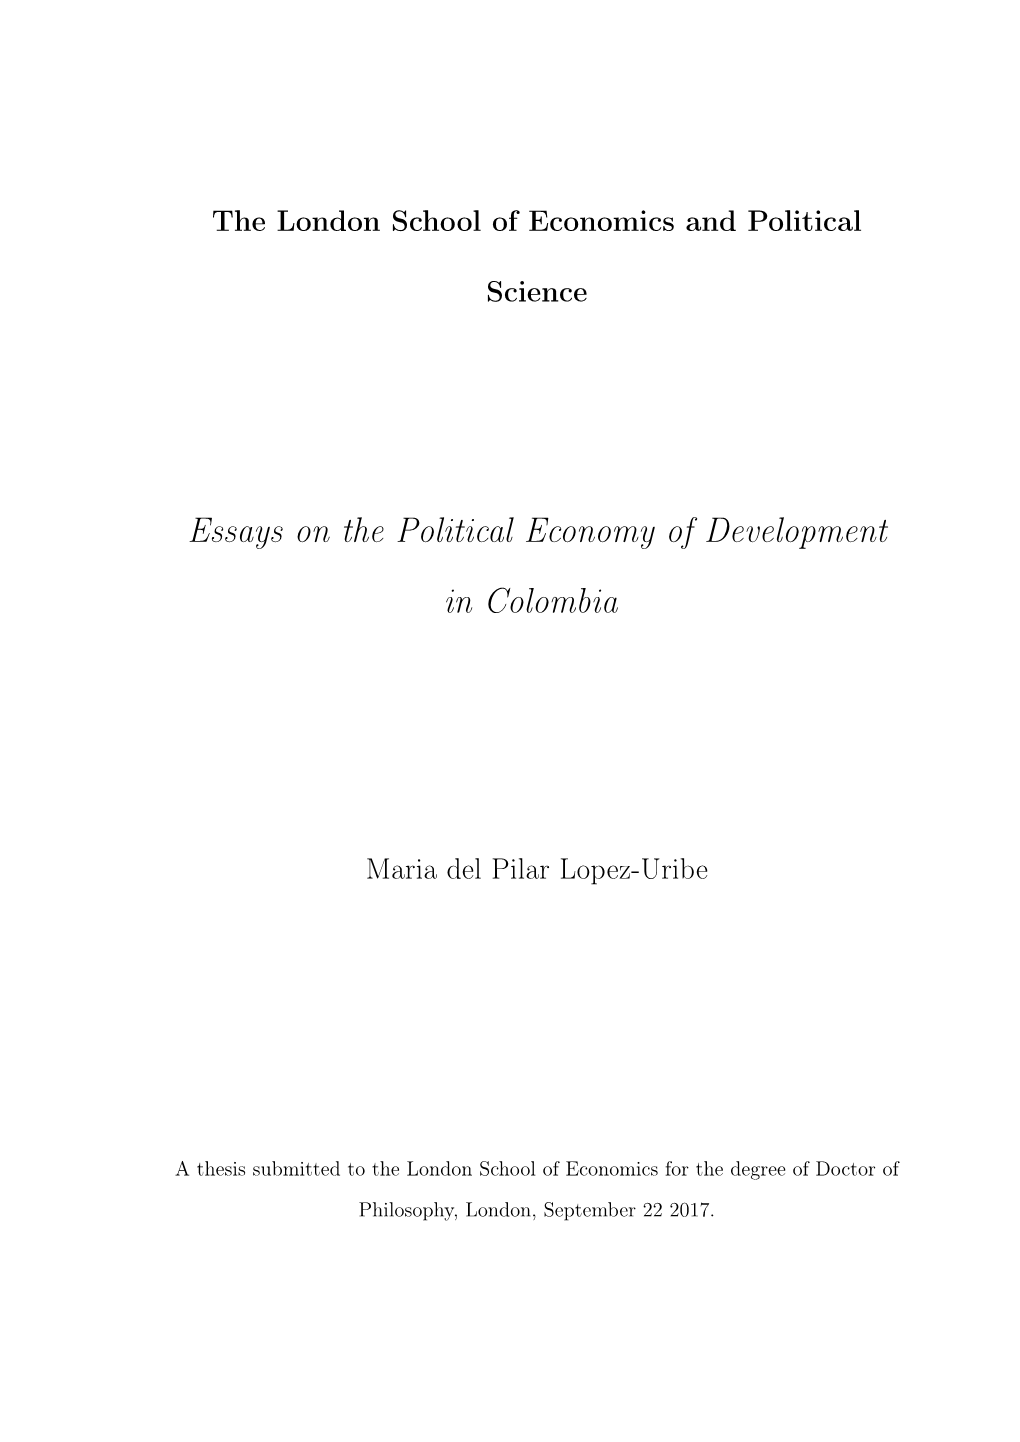 Essays on the Political Economy of Development in Colombia